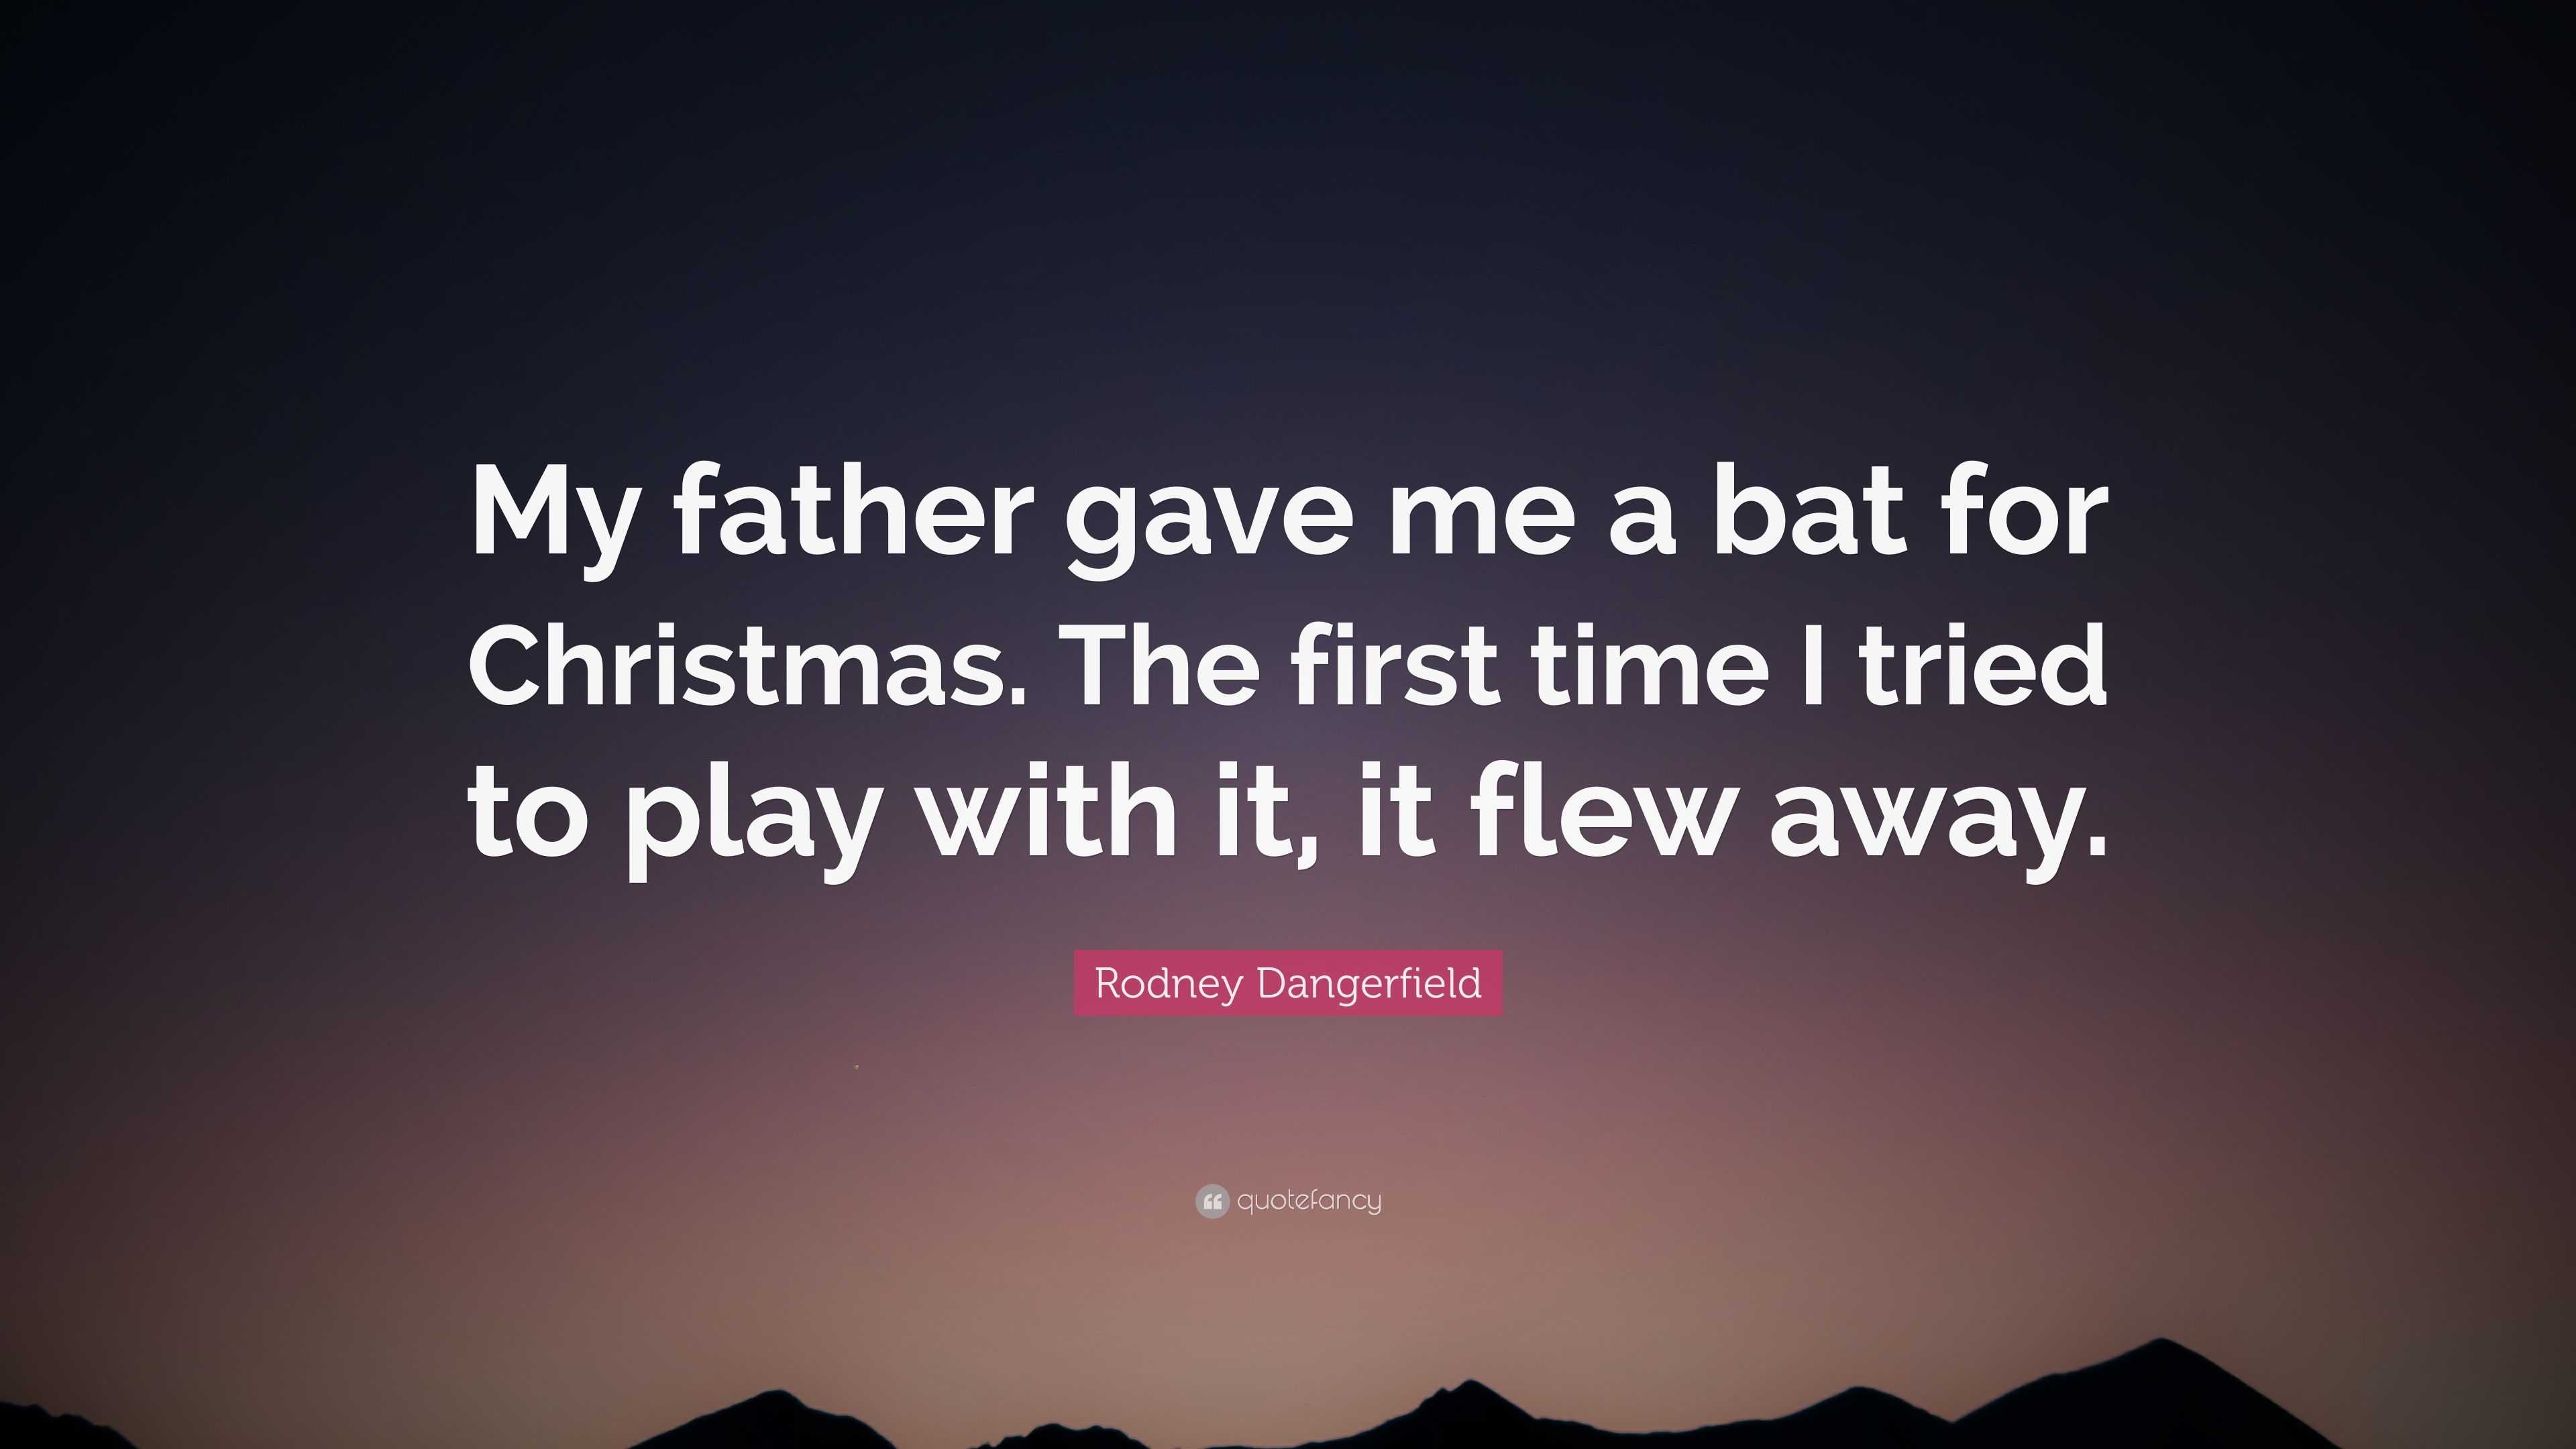 Rodney Dangerfield Quote: “For Christmas one year I bought my son a BB gun.  He bought